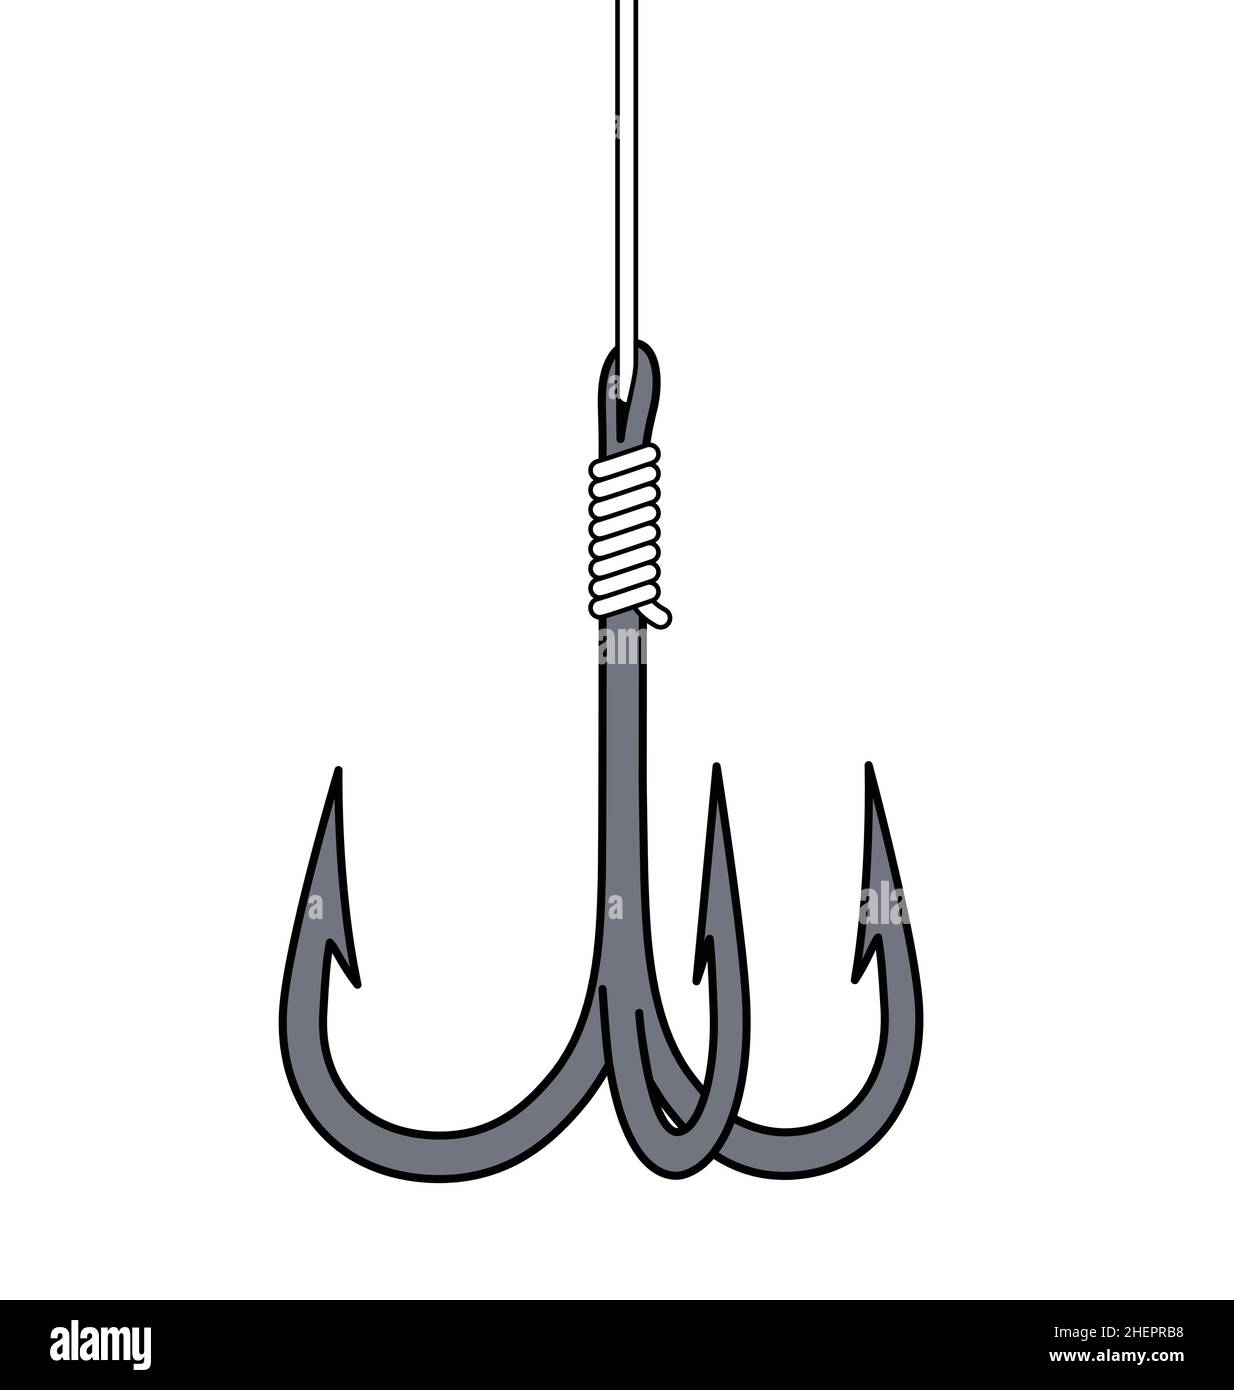 https://c8.alamy.com/comp/2HEPRB8/simple-triple-tri-3-fishing-fish-hook-with-line-string-grey-metal-steel-isolated-element-vector-on-white-background-2HEPRB8.jpg